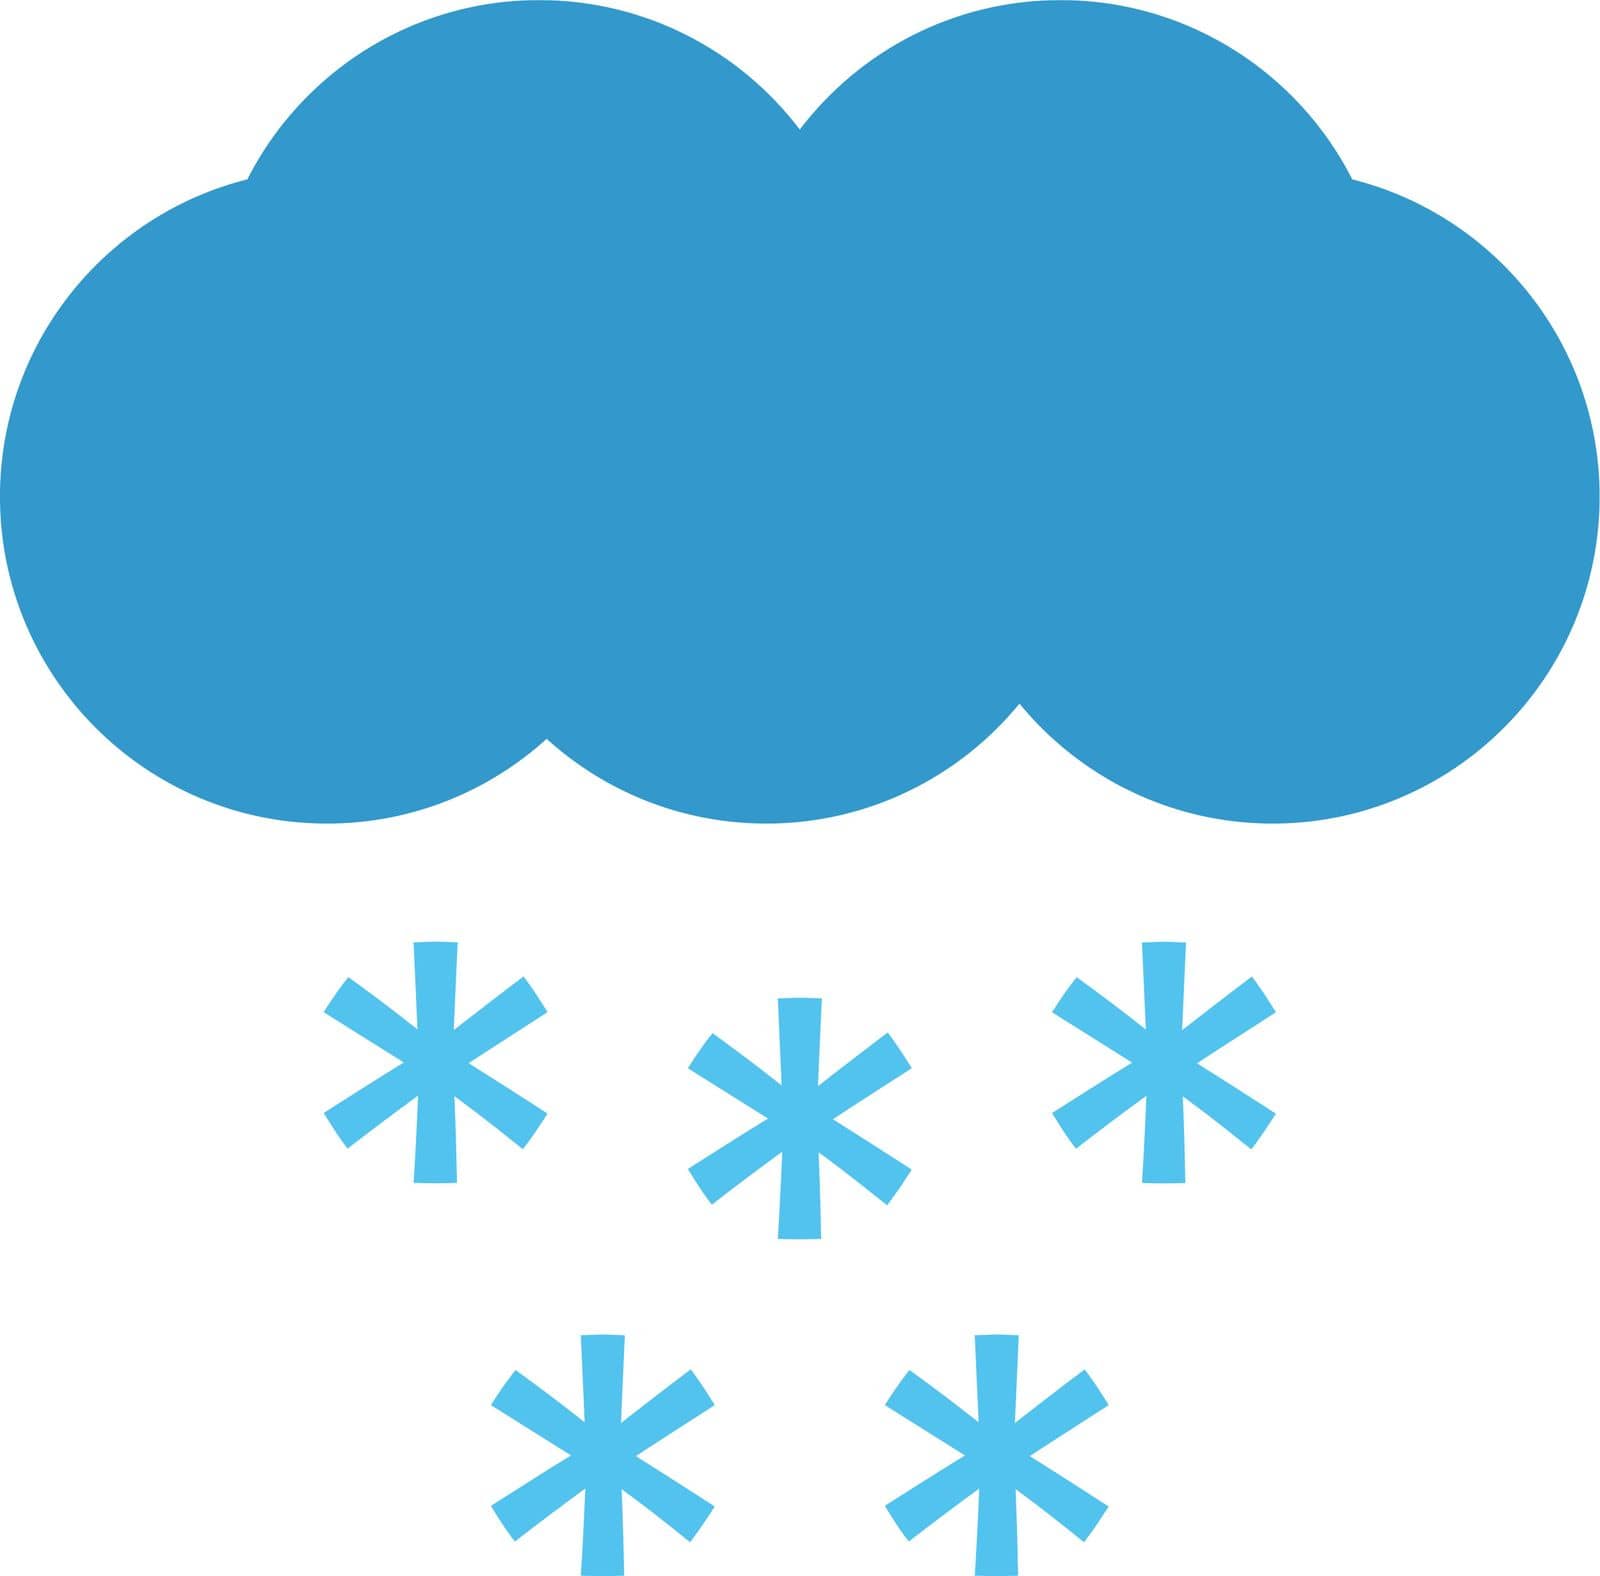 Snow, vector. Cloud and snowflakes in blue on a white background.